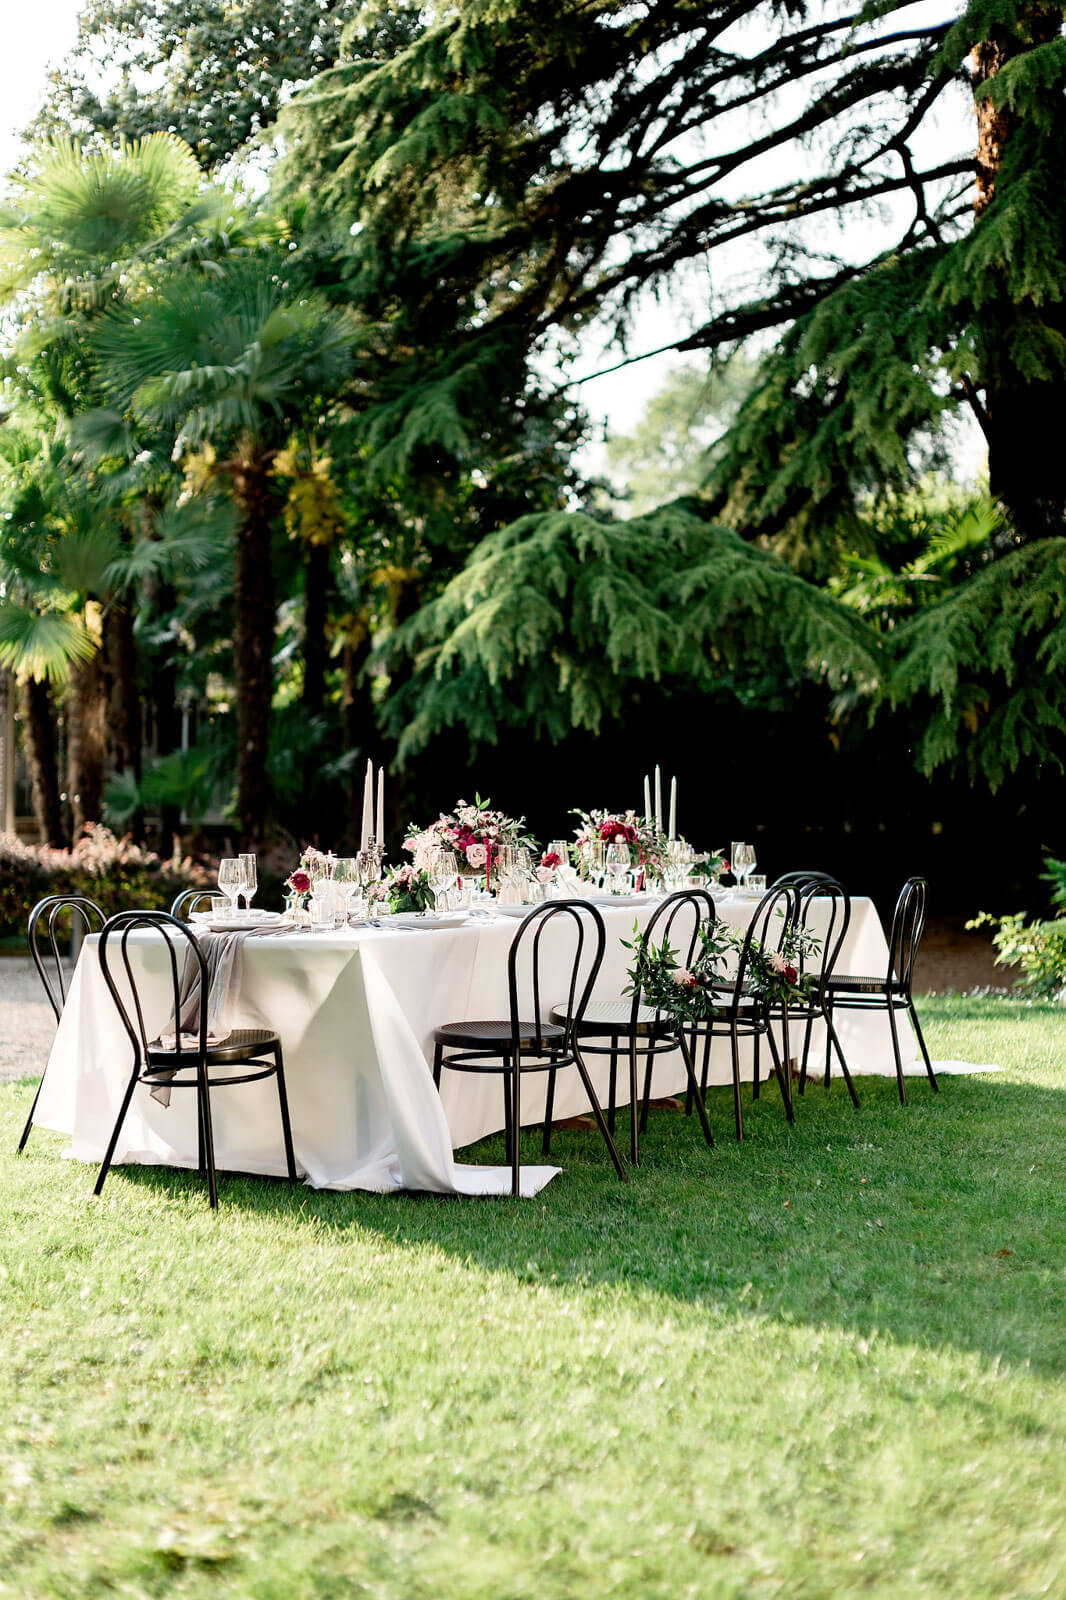 A long dining table and chairs, with white table cloth, flower bouquet and candle centerpieces, with trees on the background